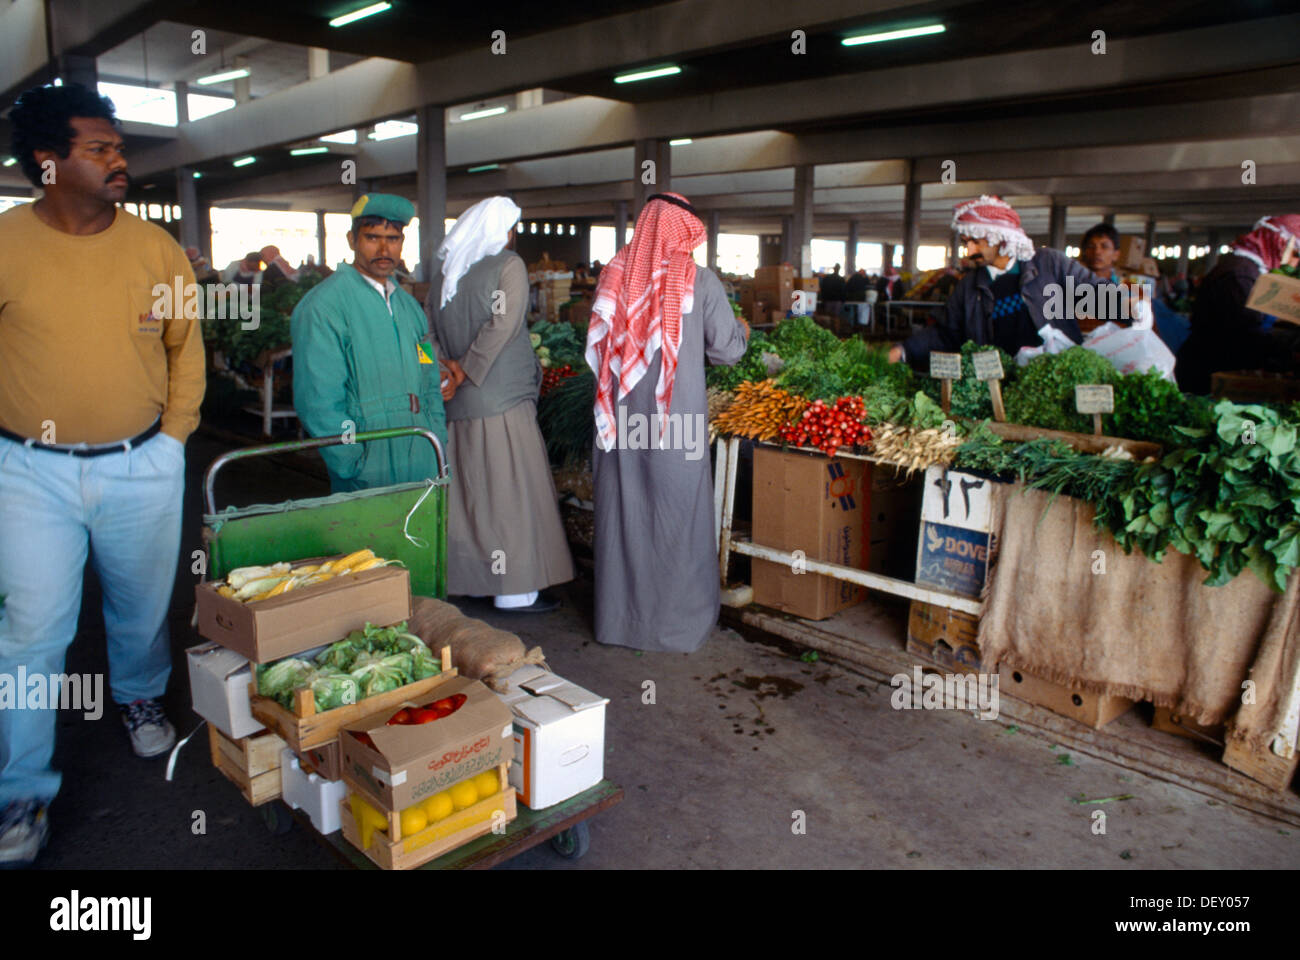 Kuwait City Kuwait People At Iranian Vegetable Market With Foreign Worker Stock Photo